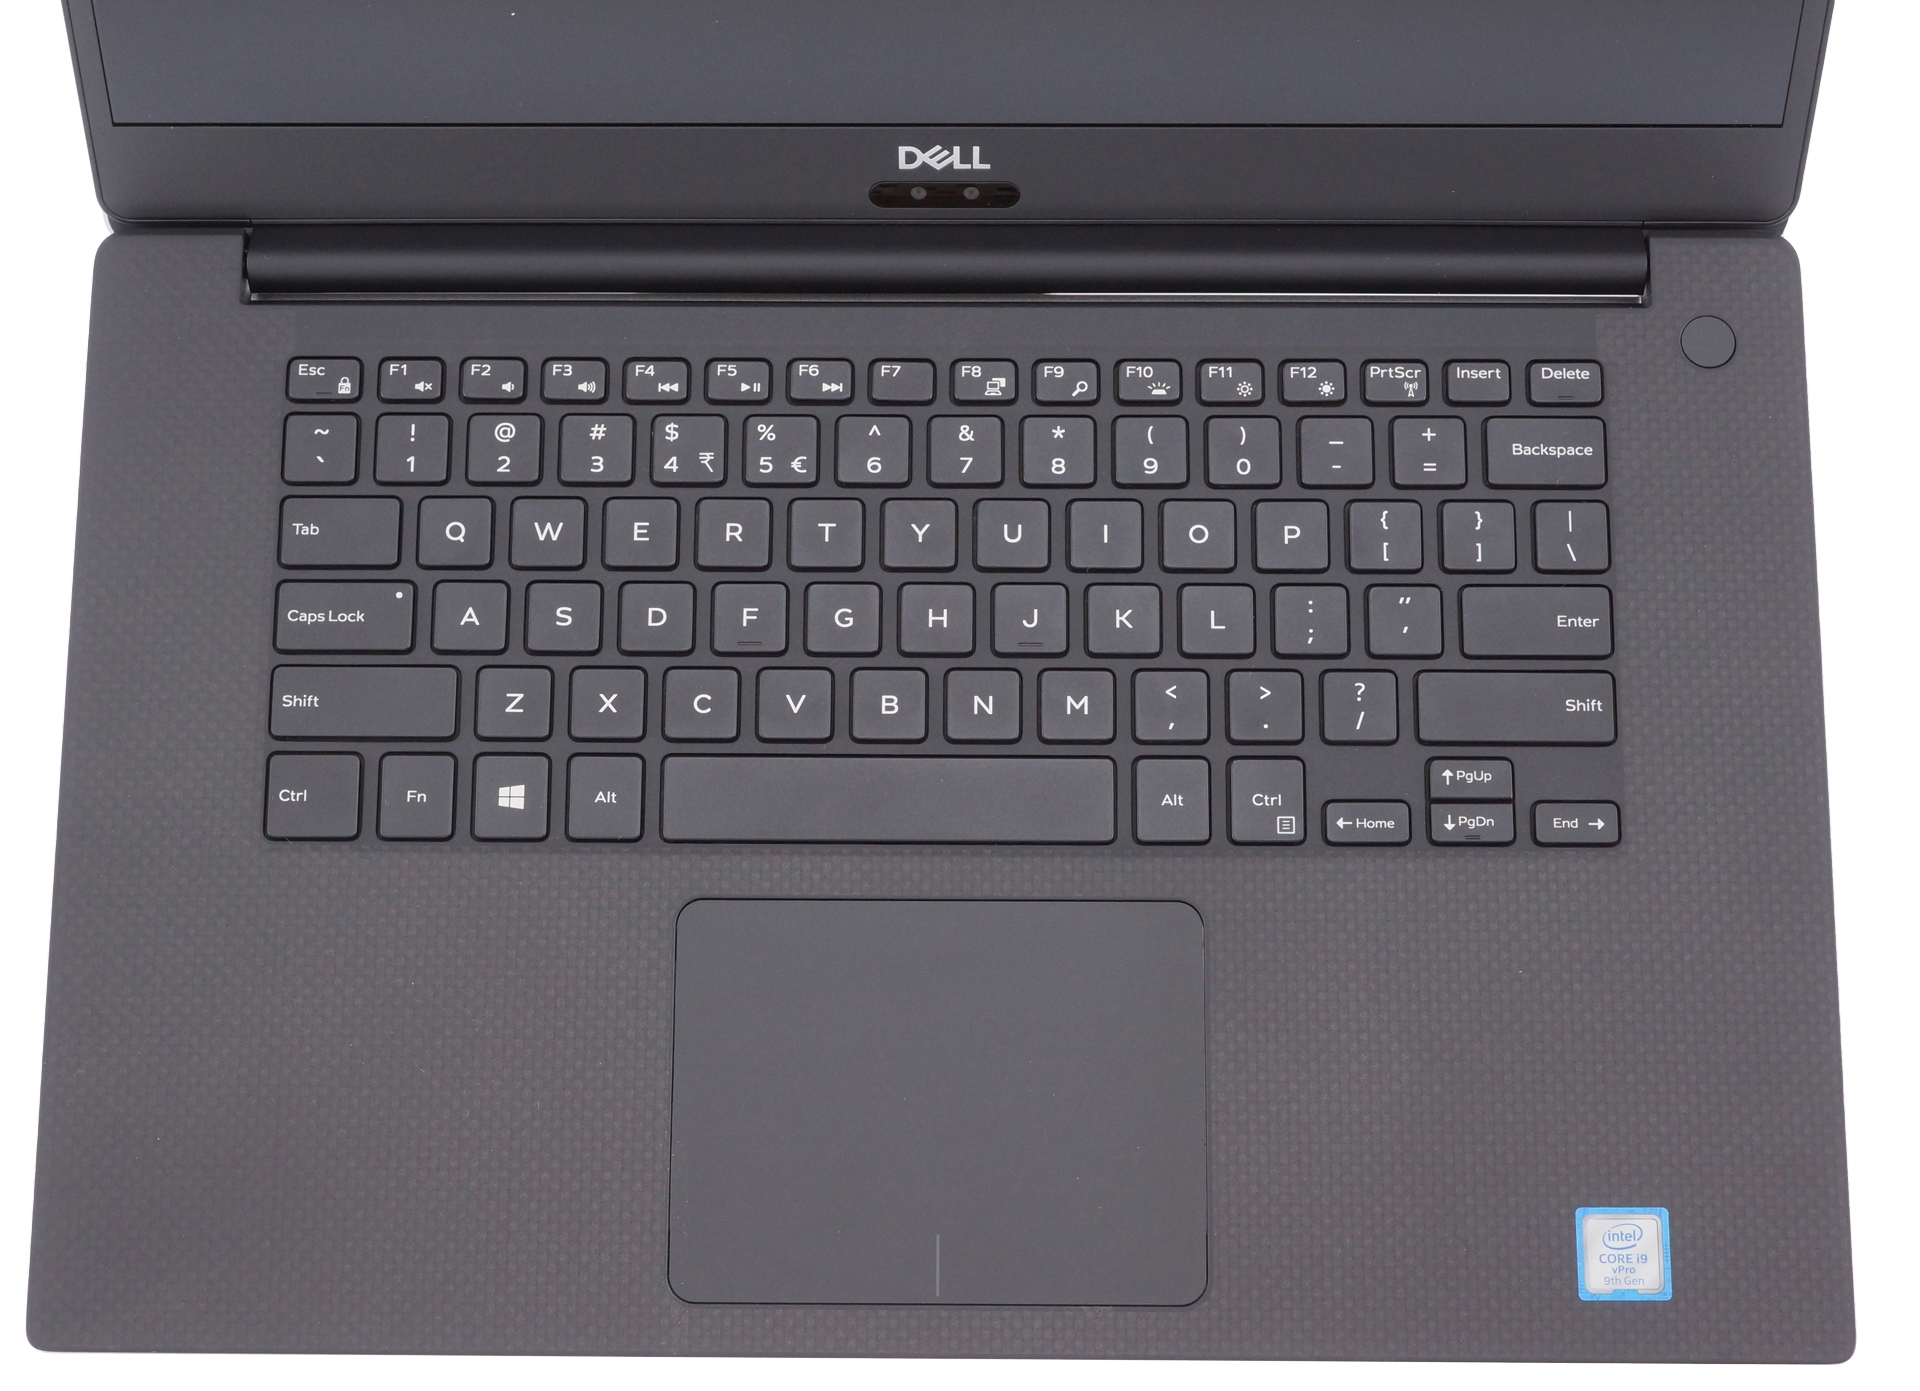 Dell Precision 15 5540 review - a thin and light tool for